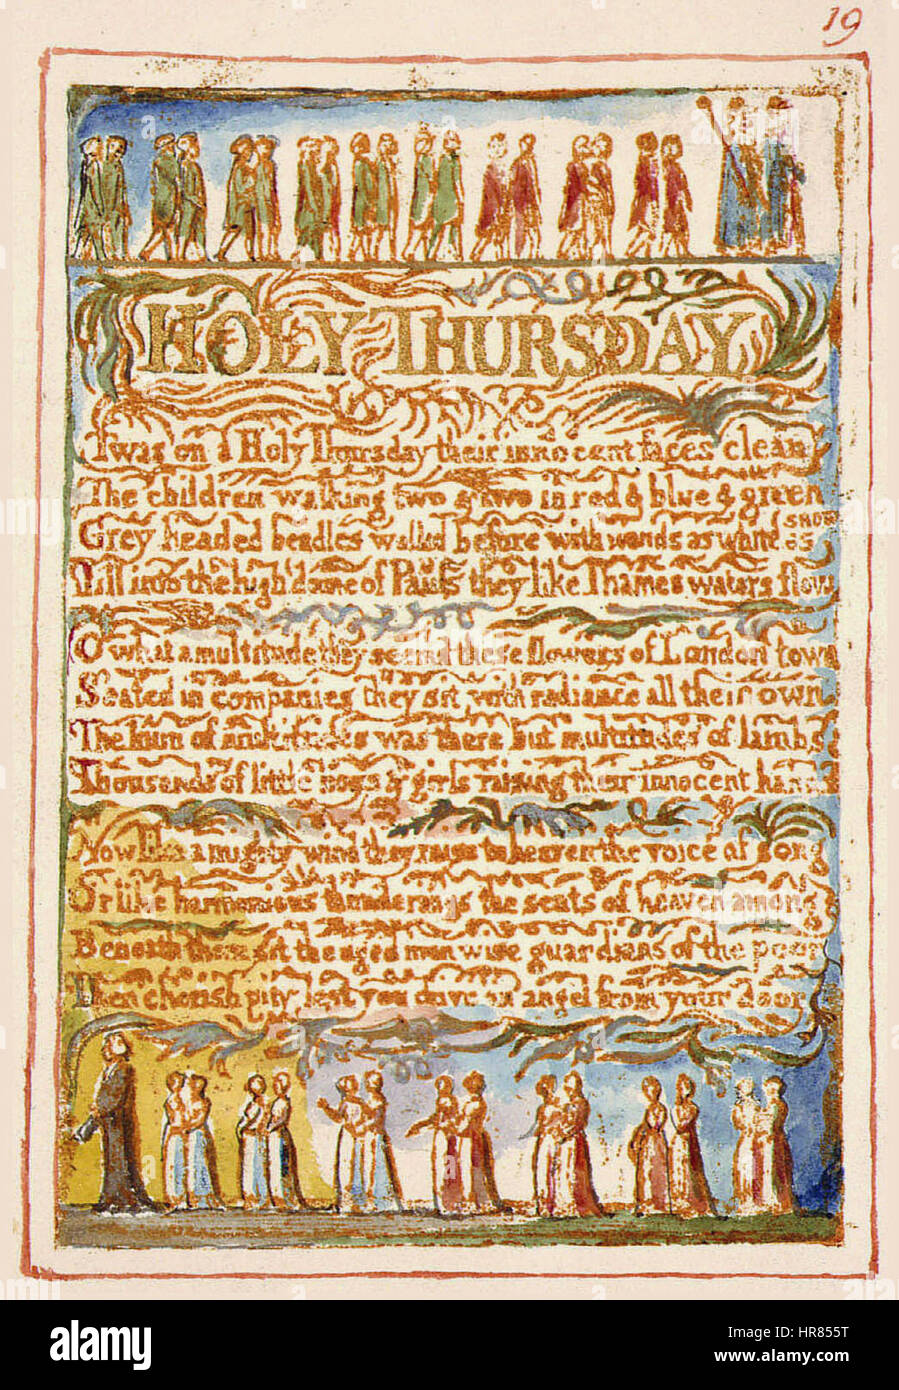 Songs of Innocence and of Experience, copy AA, 1826 (The Fitzwilliam Museum) object 19 HOLY THURSDAY Stock Photo